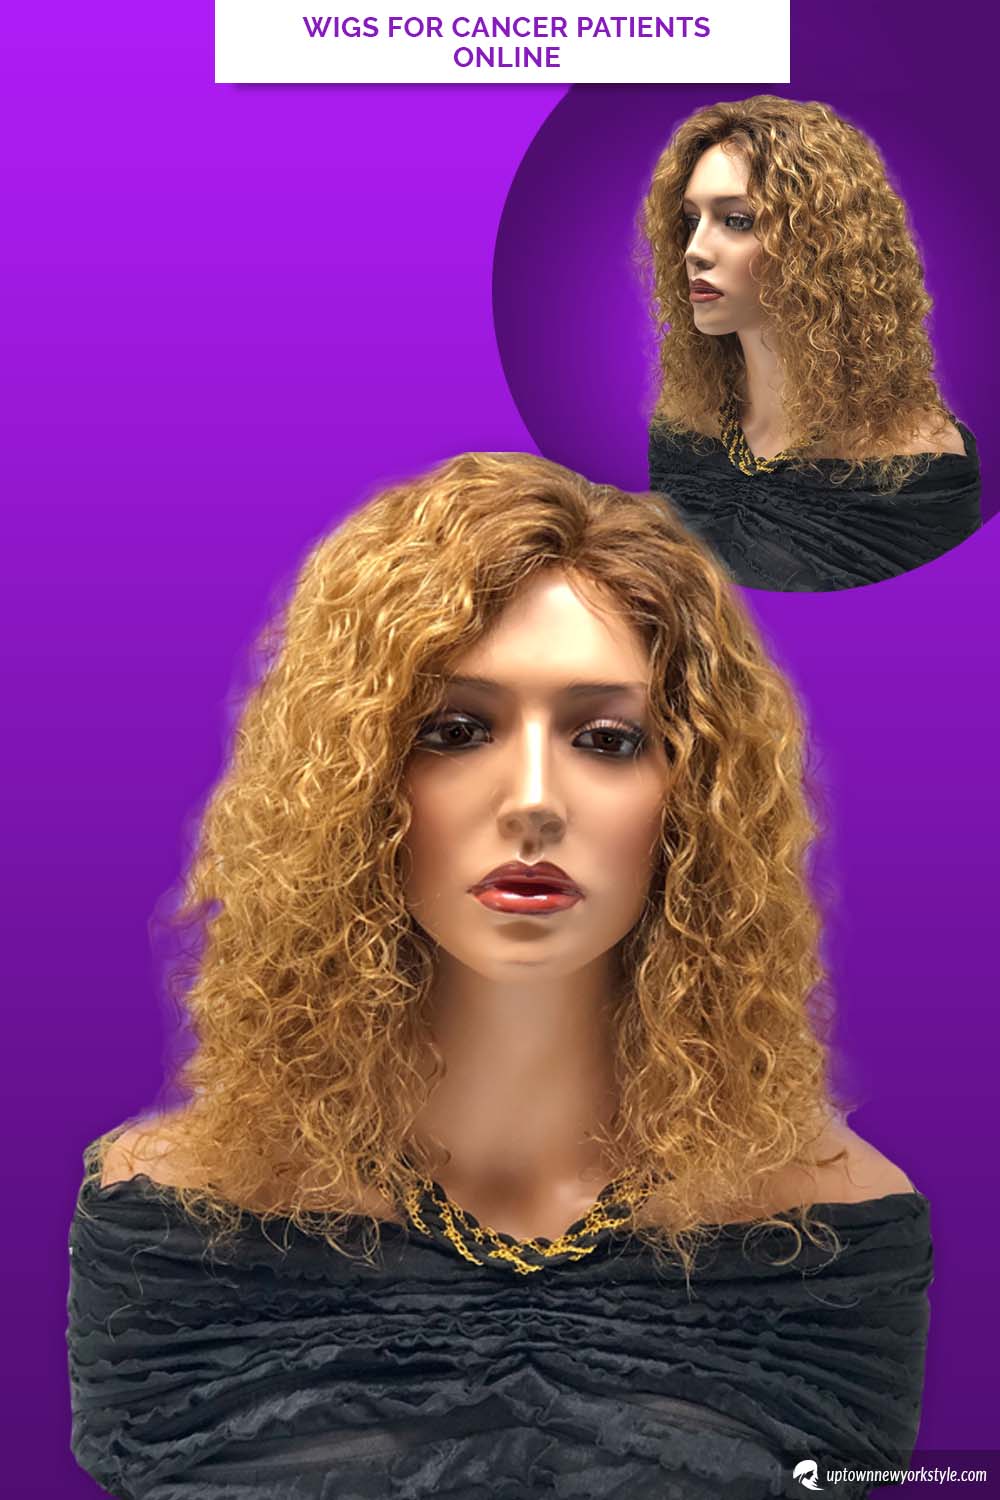 Wigs For Cancer Patients Online